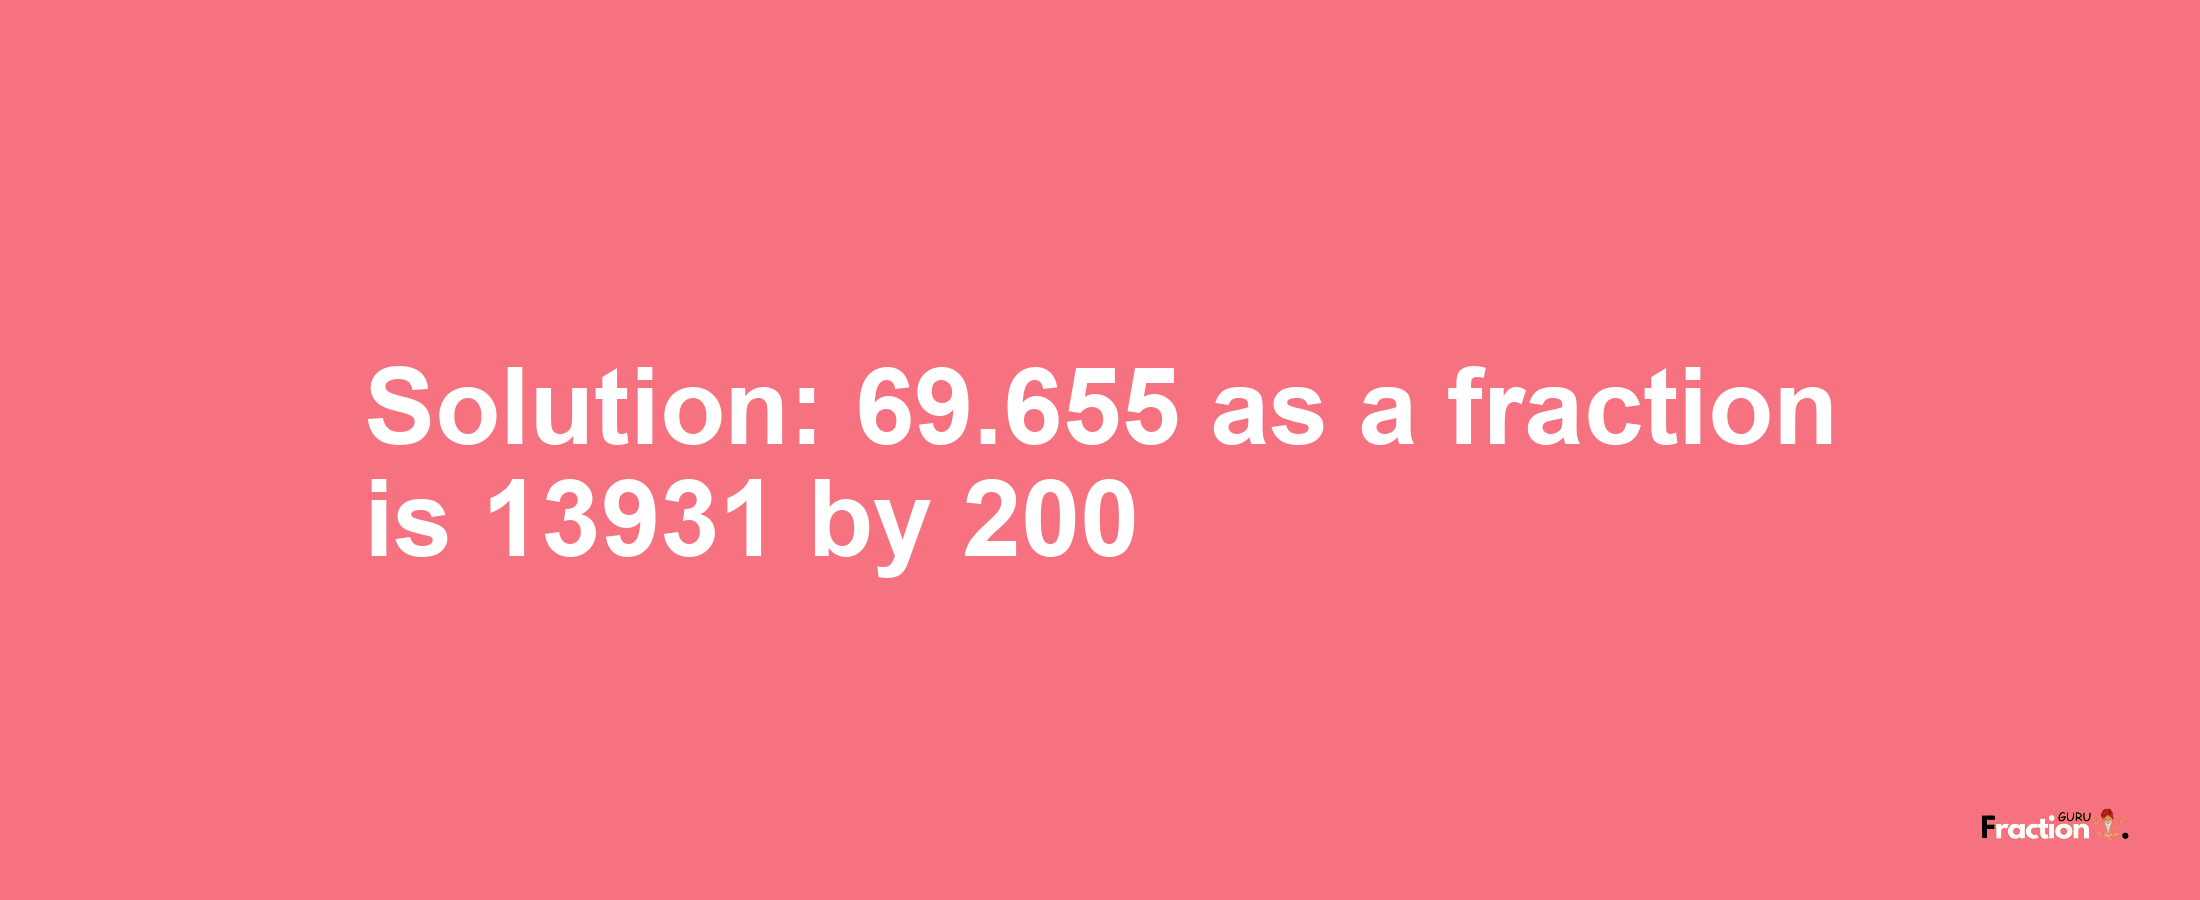 Solution:69.655 as a fraction is 13931/200